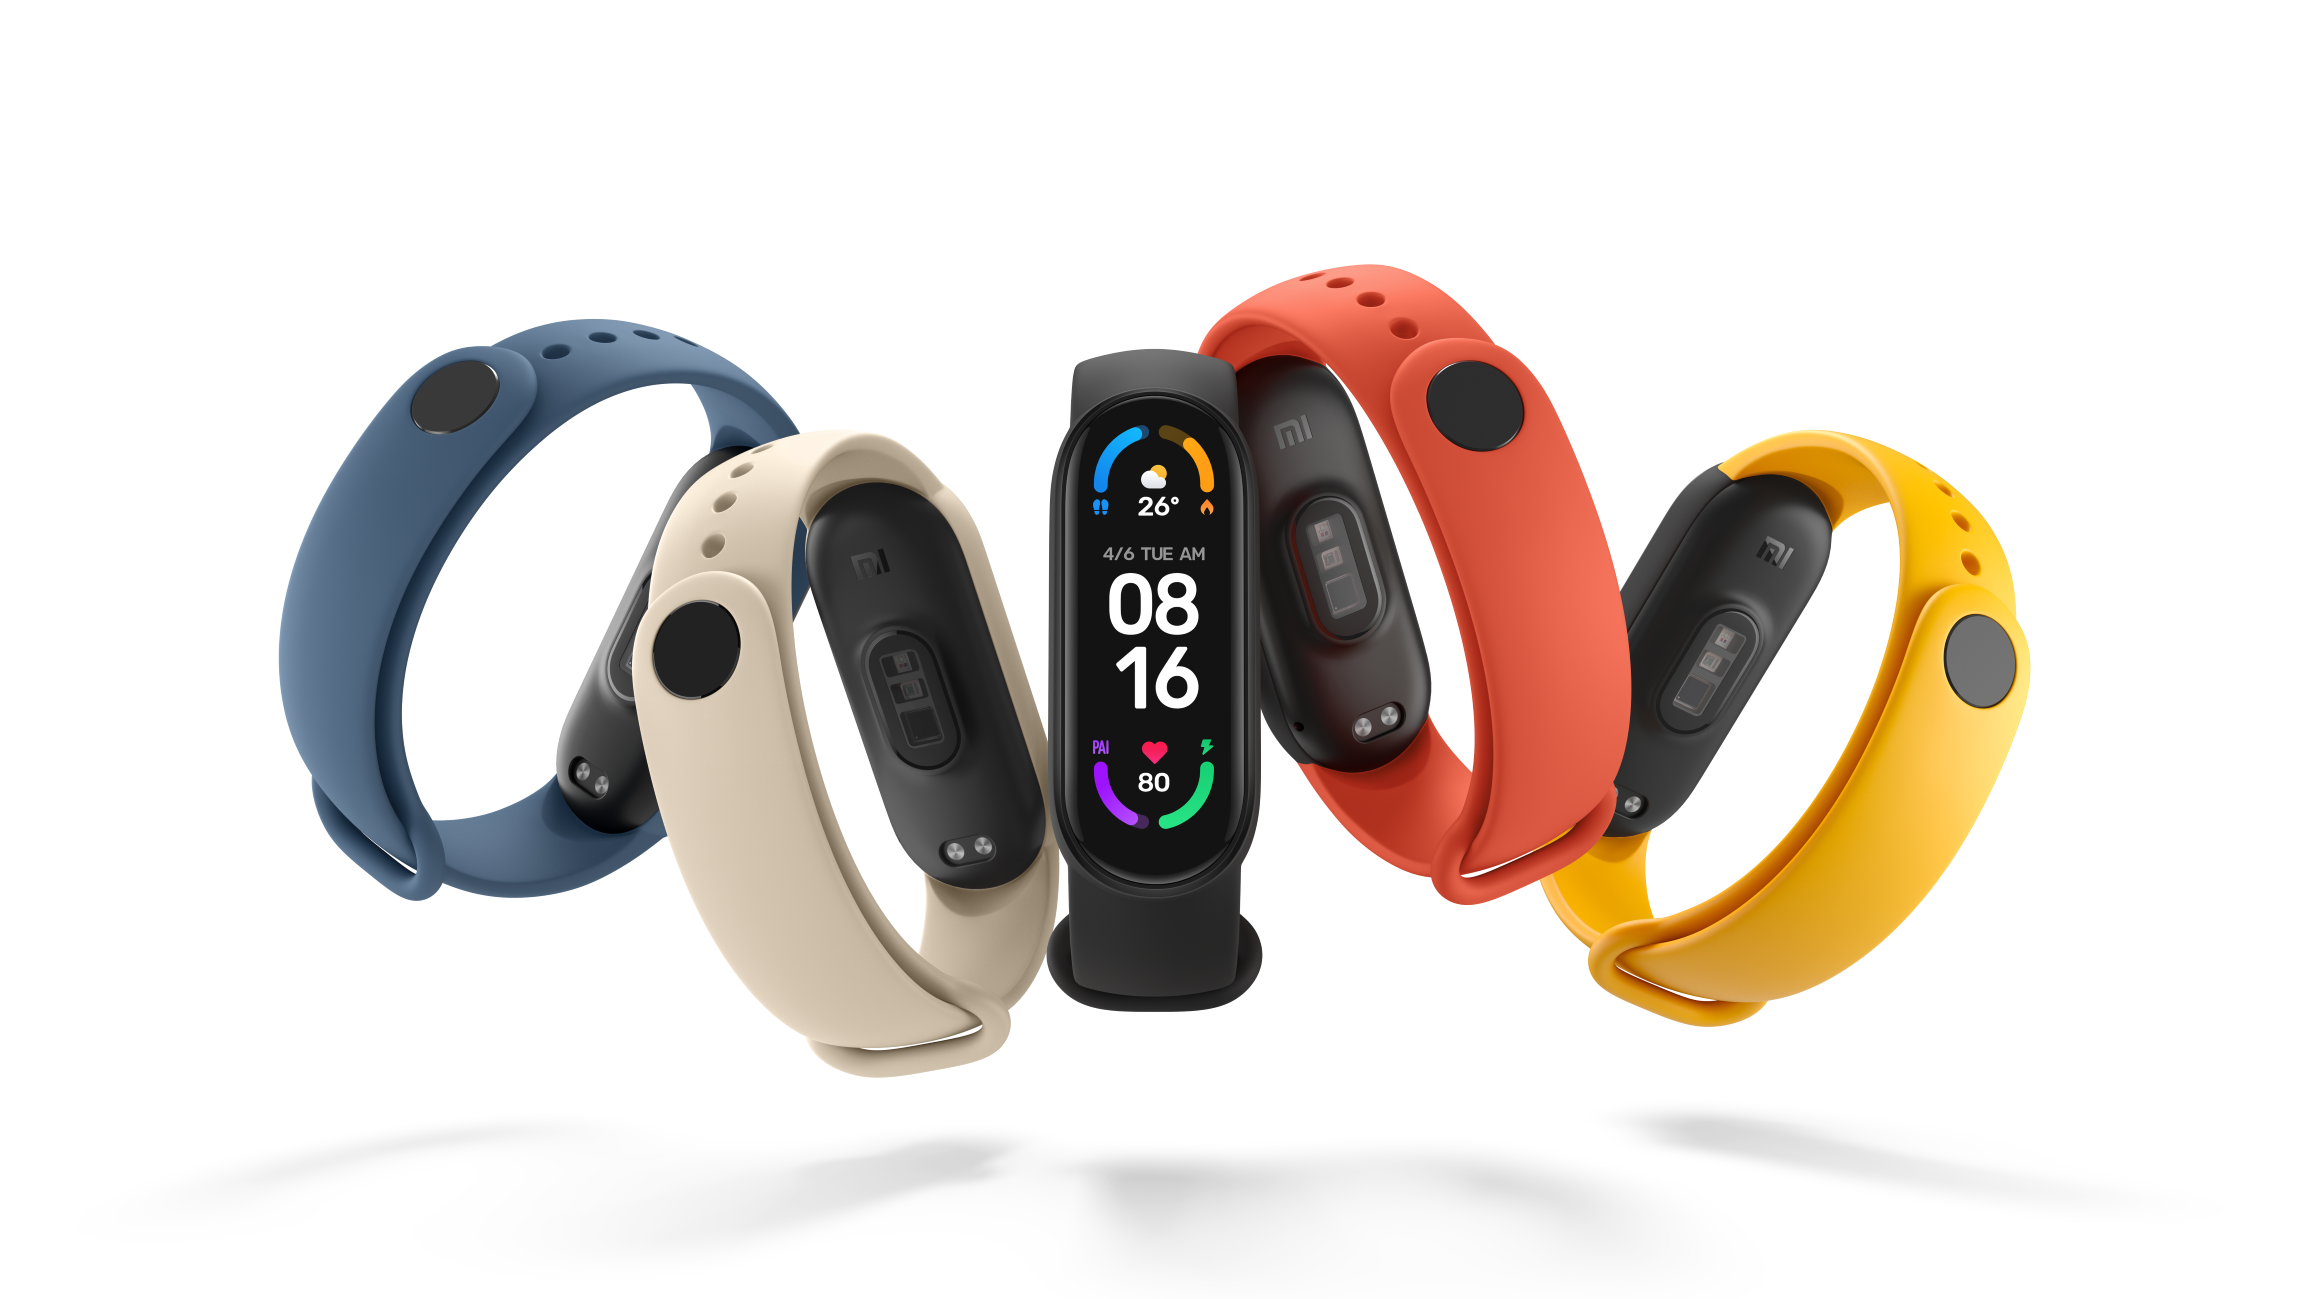 Xiaomi Mi Band 6 gets the sleep breathing quality feature via a new update  - Gizmochina